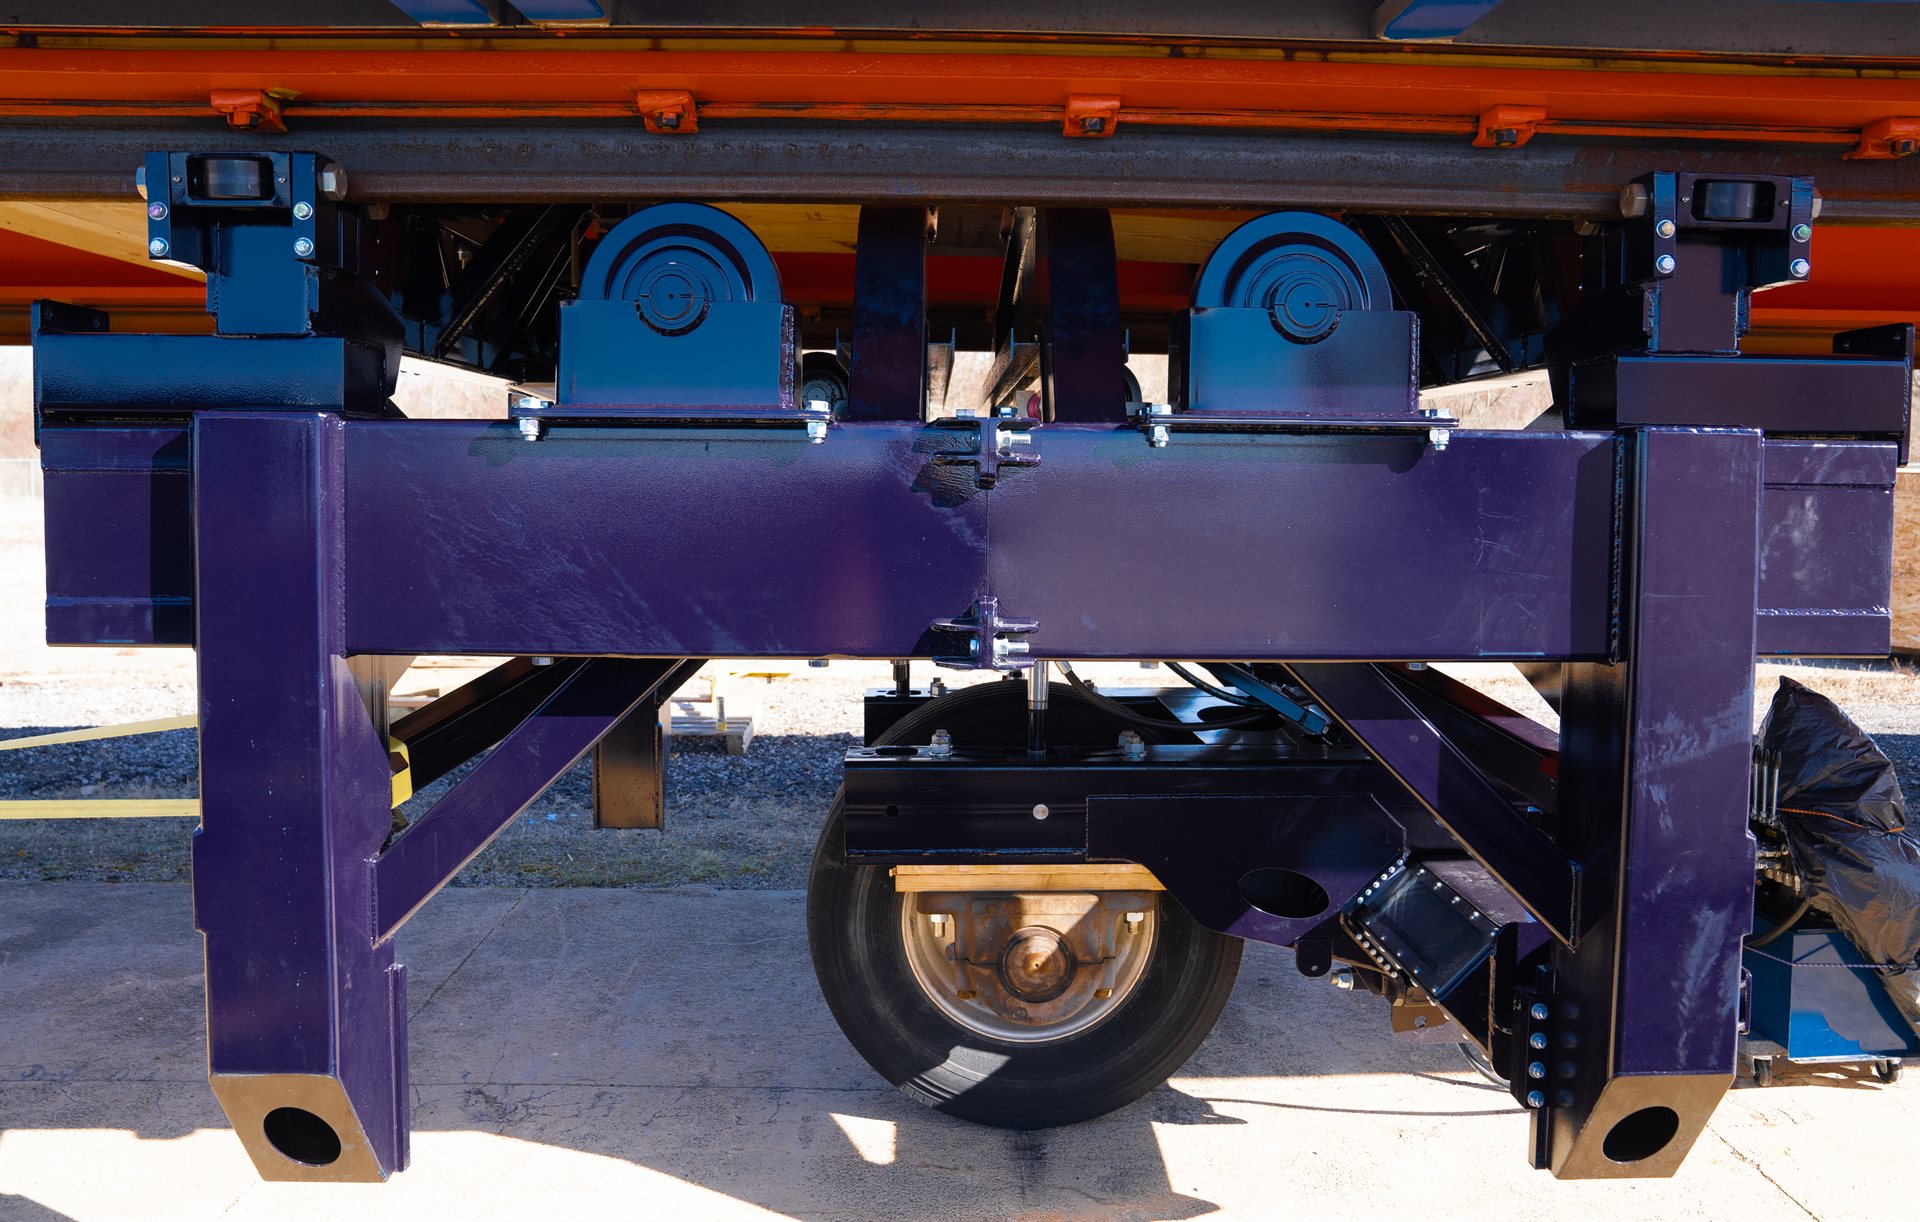 A side view of the enhanced load carriage. The upgraded design allows testing with single or tandem axles, breaking and acceleration, and axle yaw up to 6 degrees.